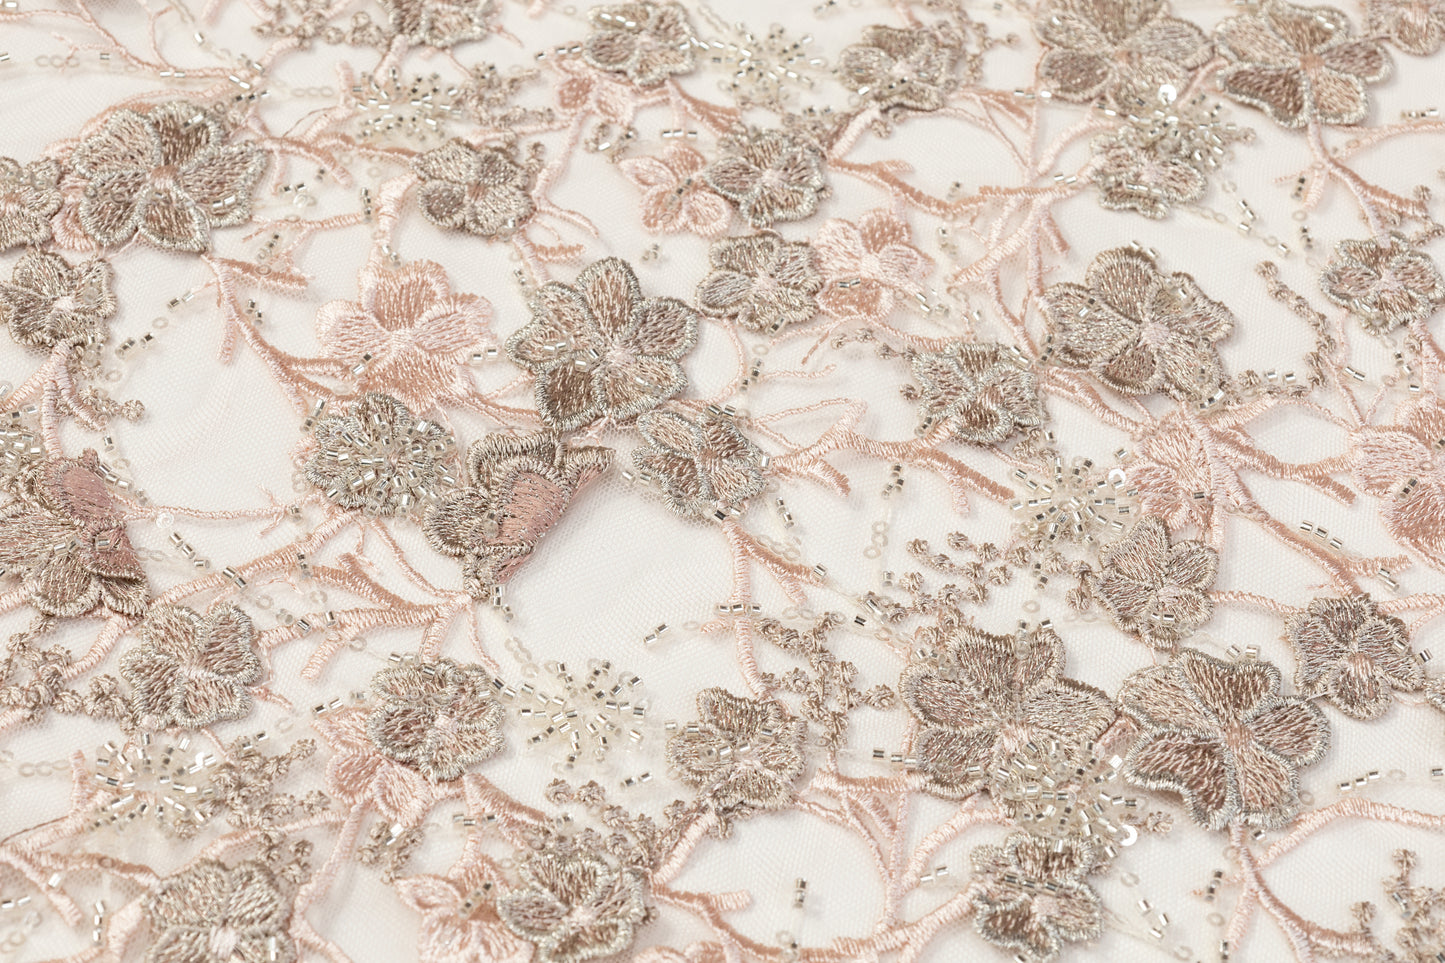 Floral Beaded and Embroidered Tulle - Pink / Taupe